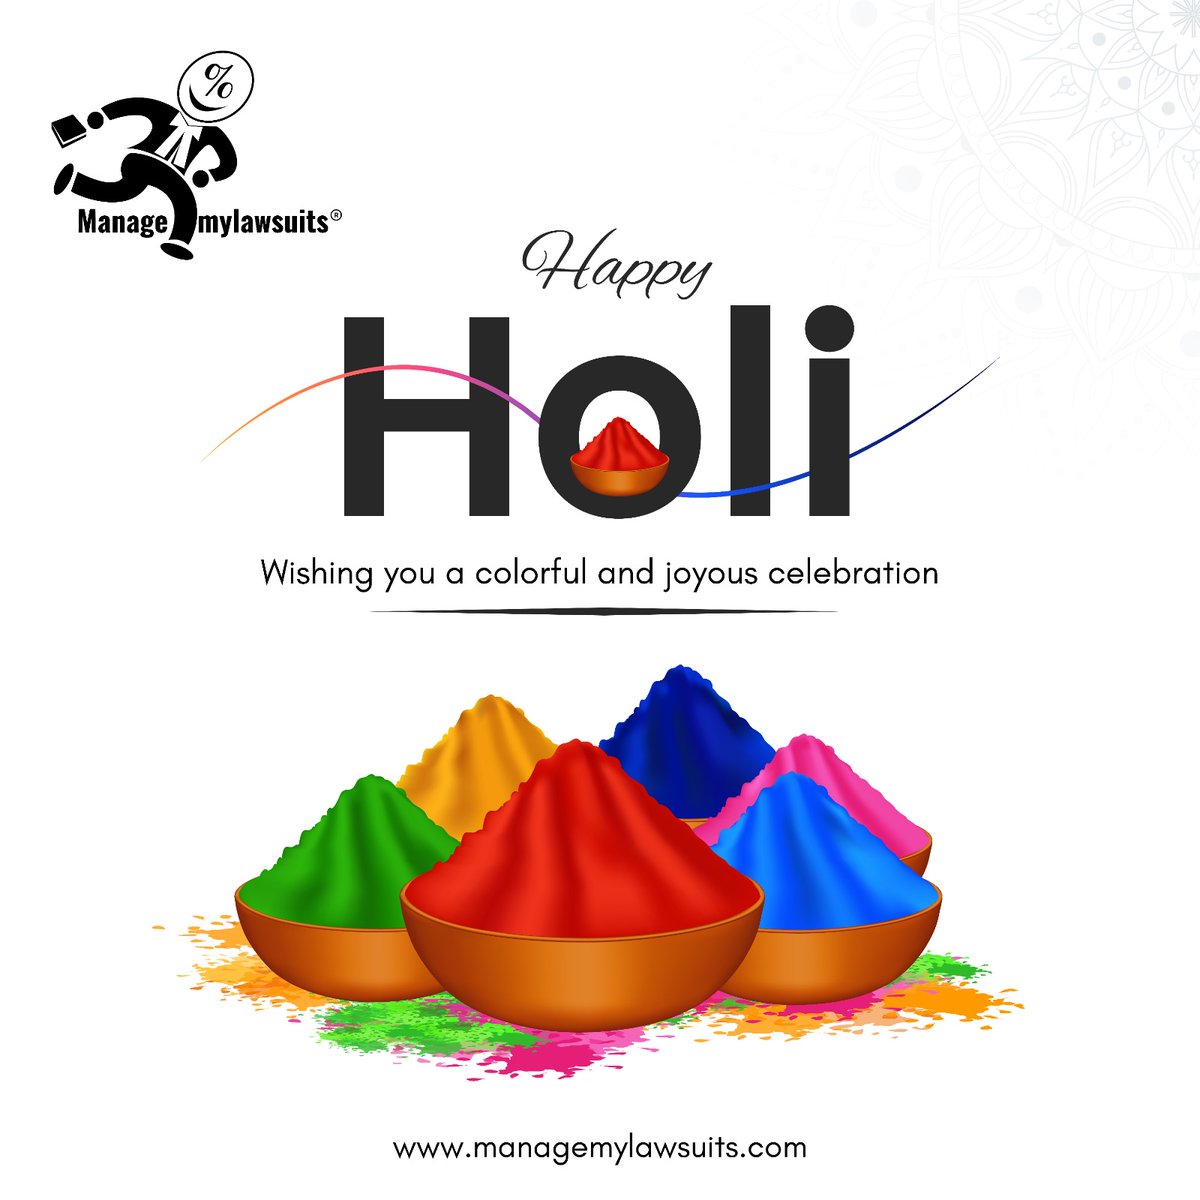 Happy Holi! May the festival of colours fill your life with happiness & health!

#festival #holi #managemylawsuits #software